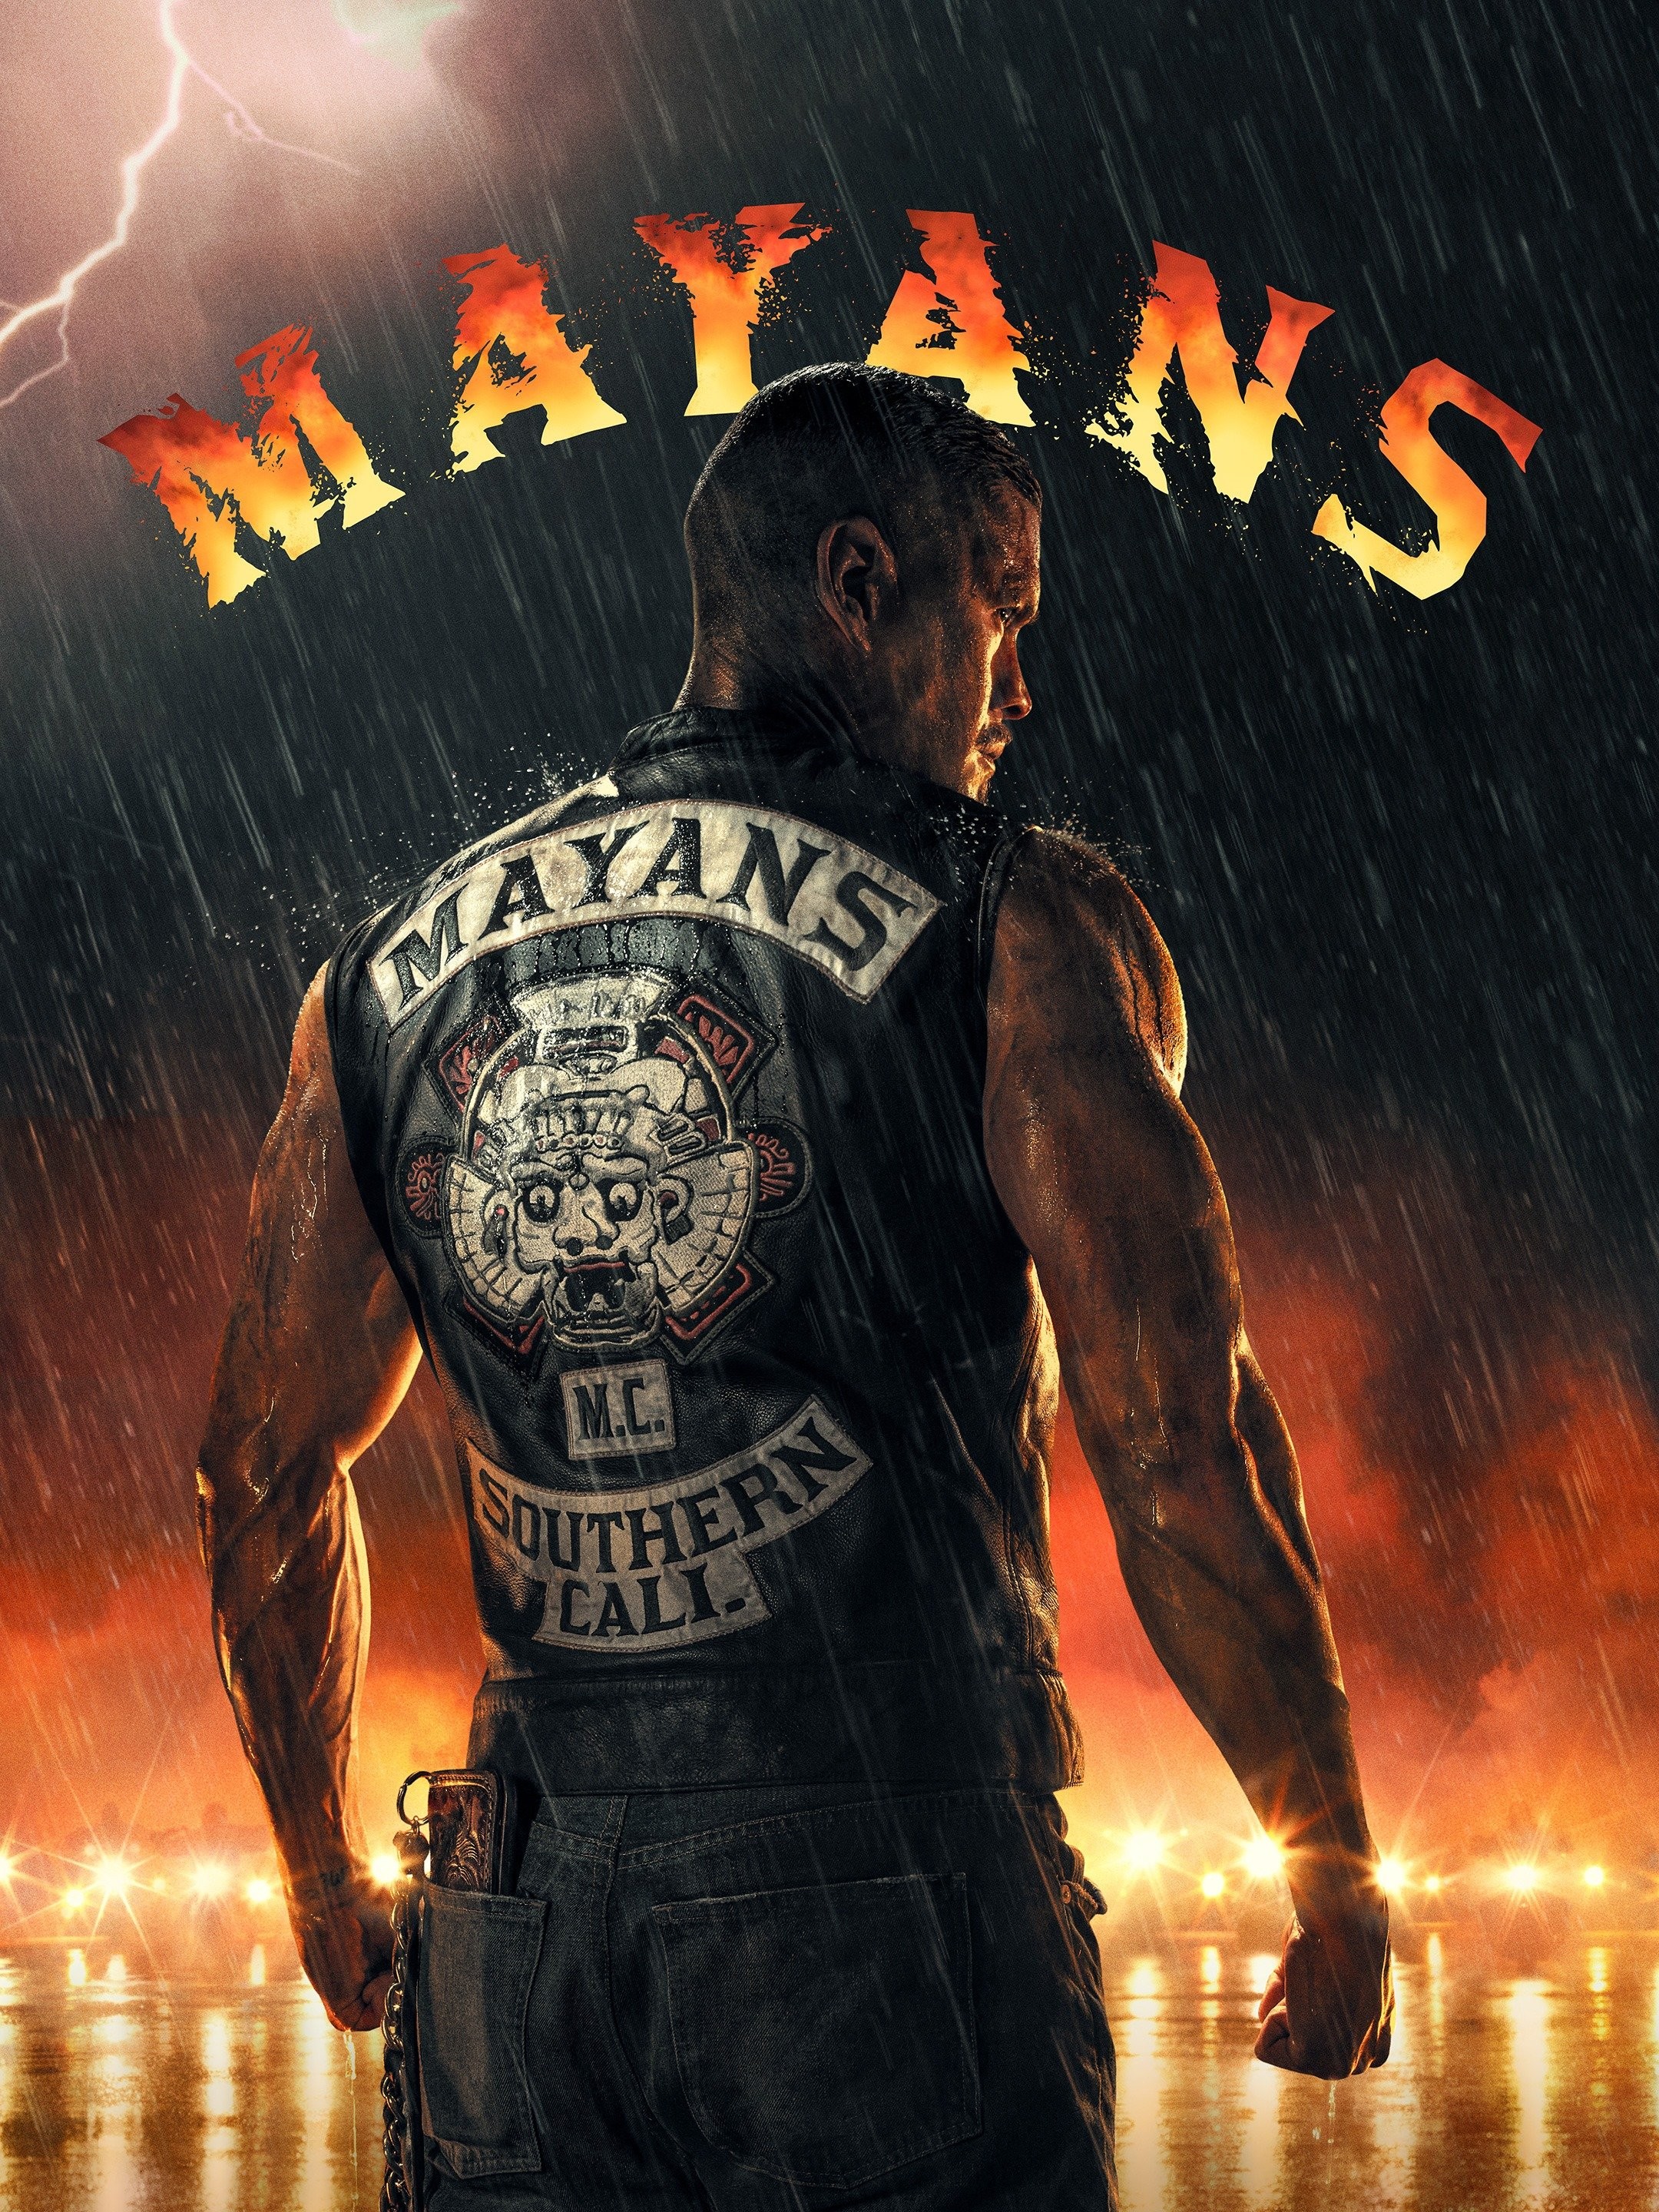 Mayans M.C. season 5 on FX: Release date, air time, plot, and more details